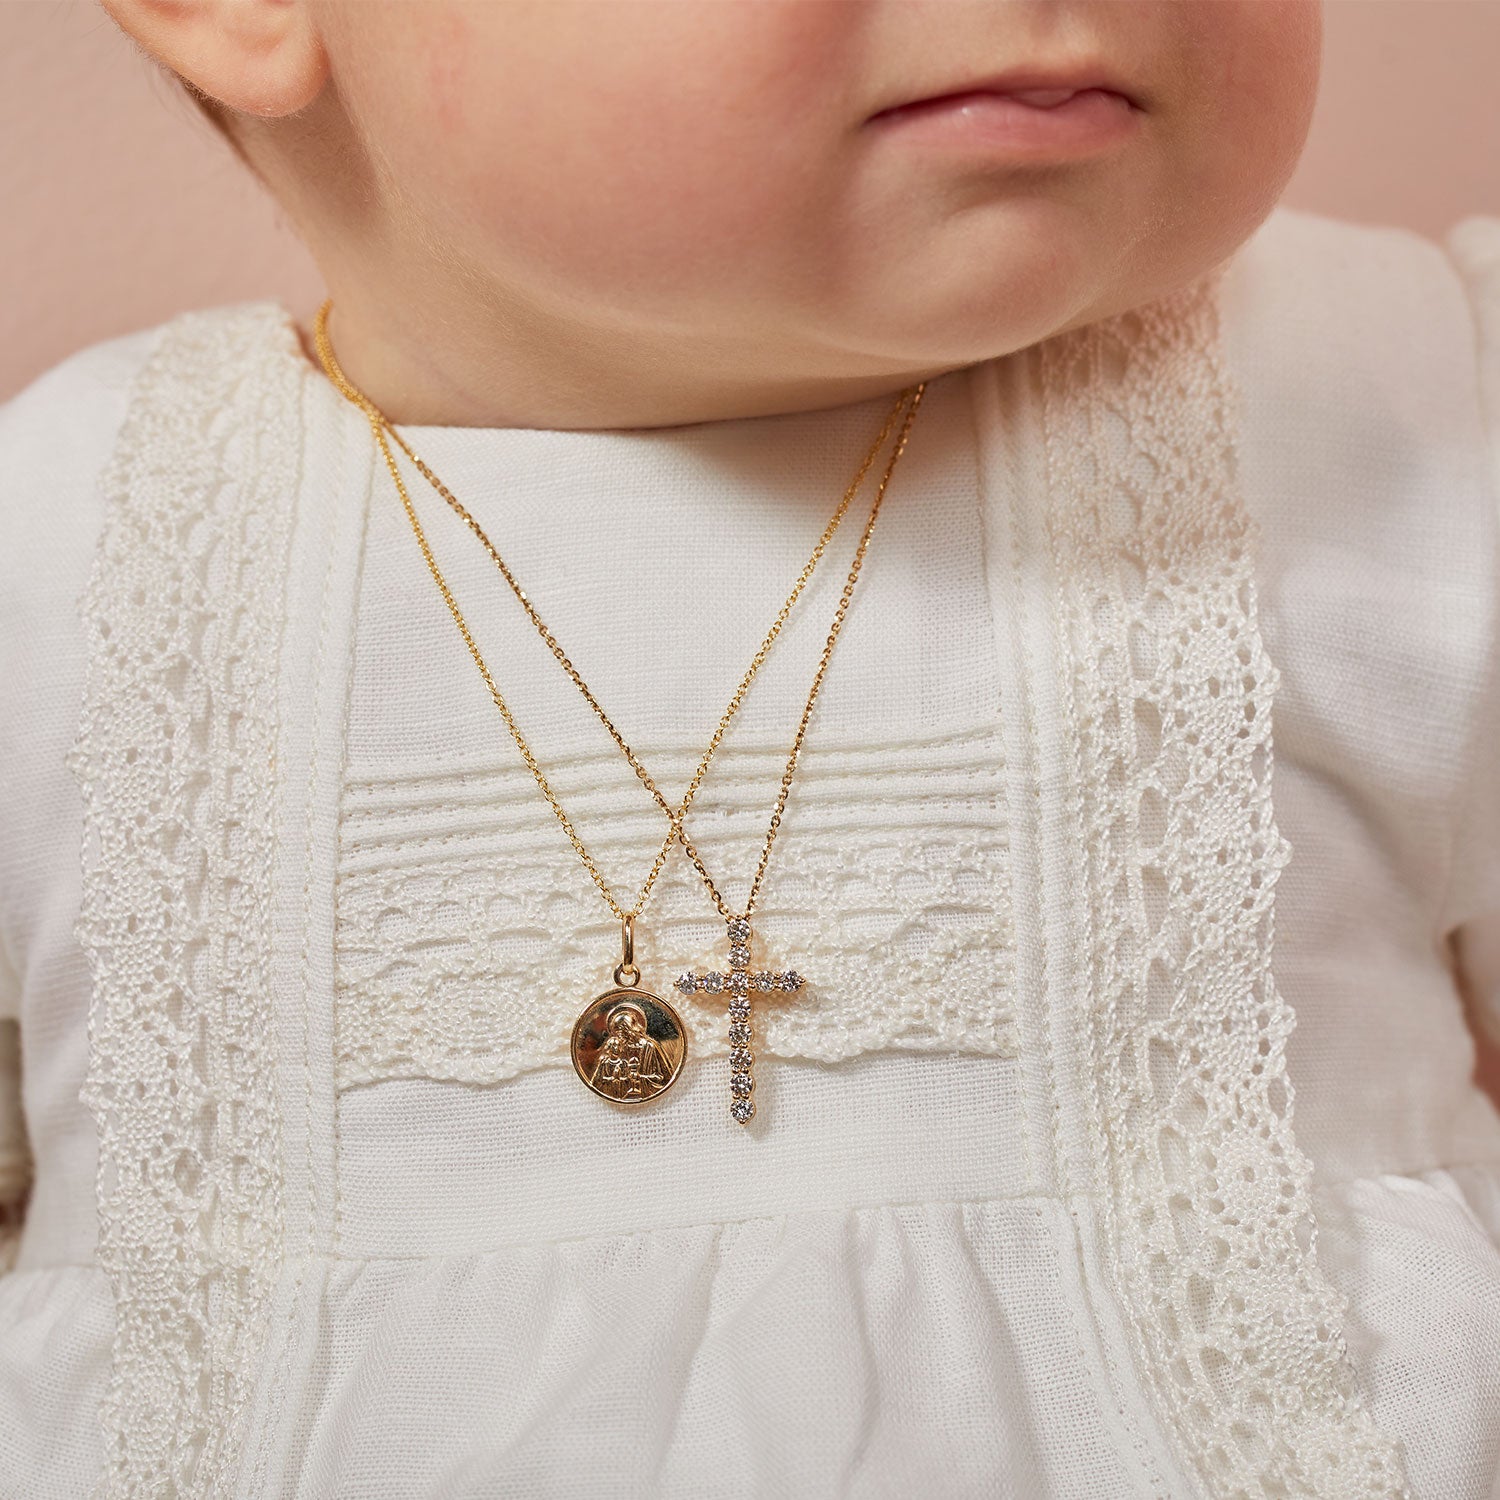 The Son of Man Necklace | SPARROW